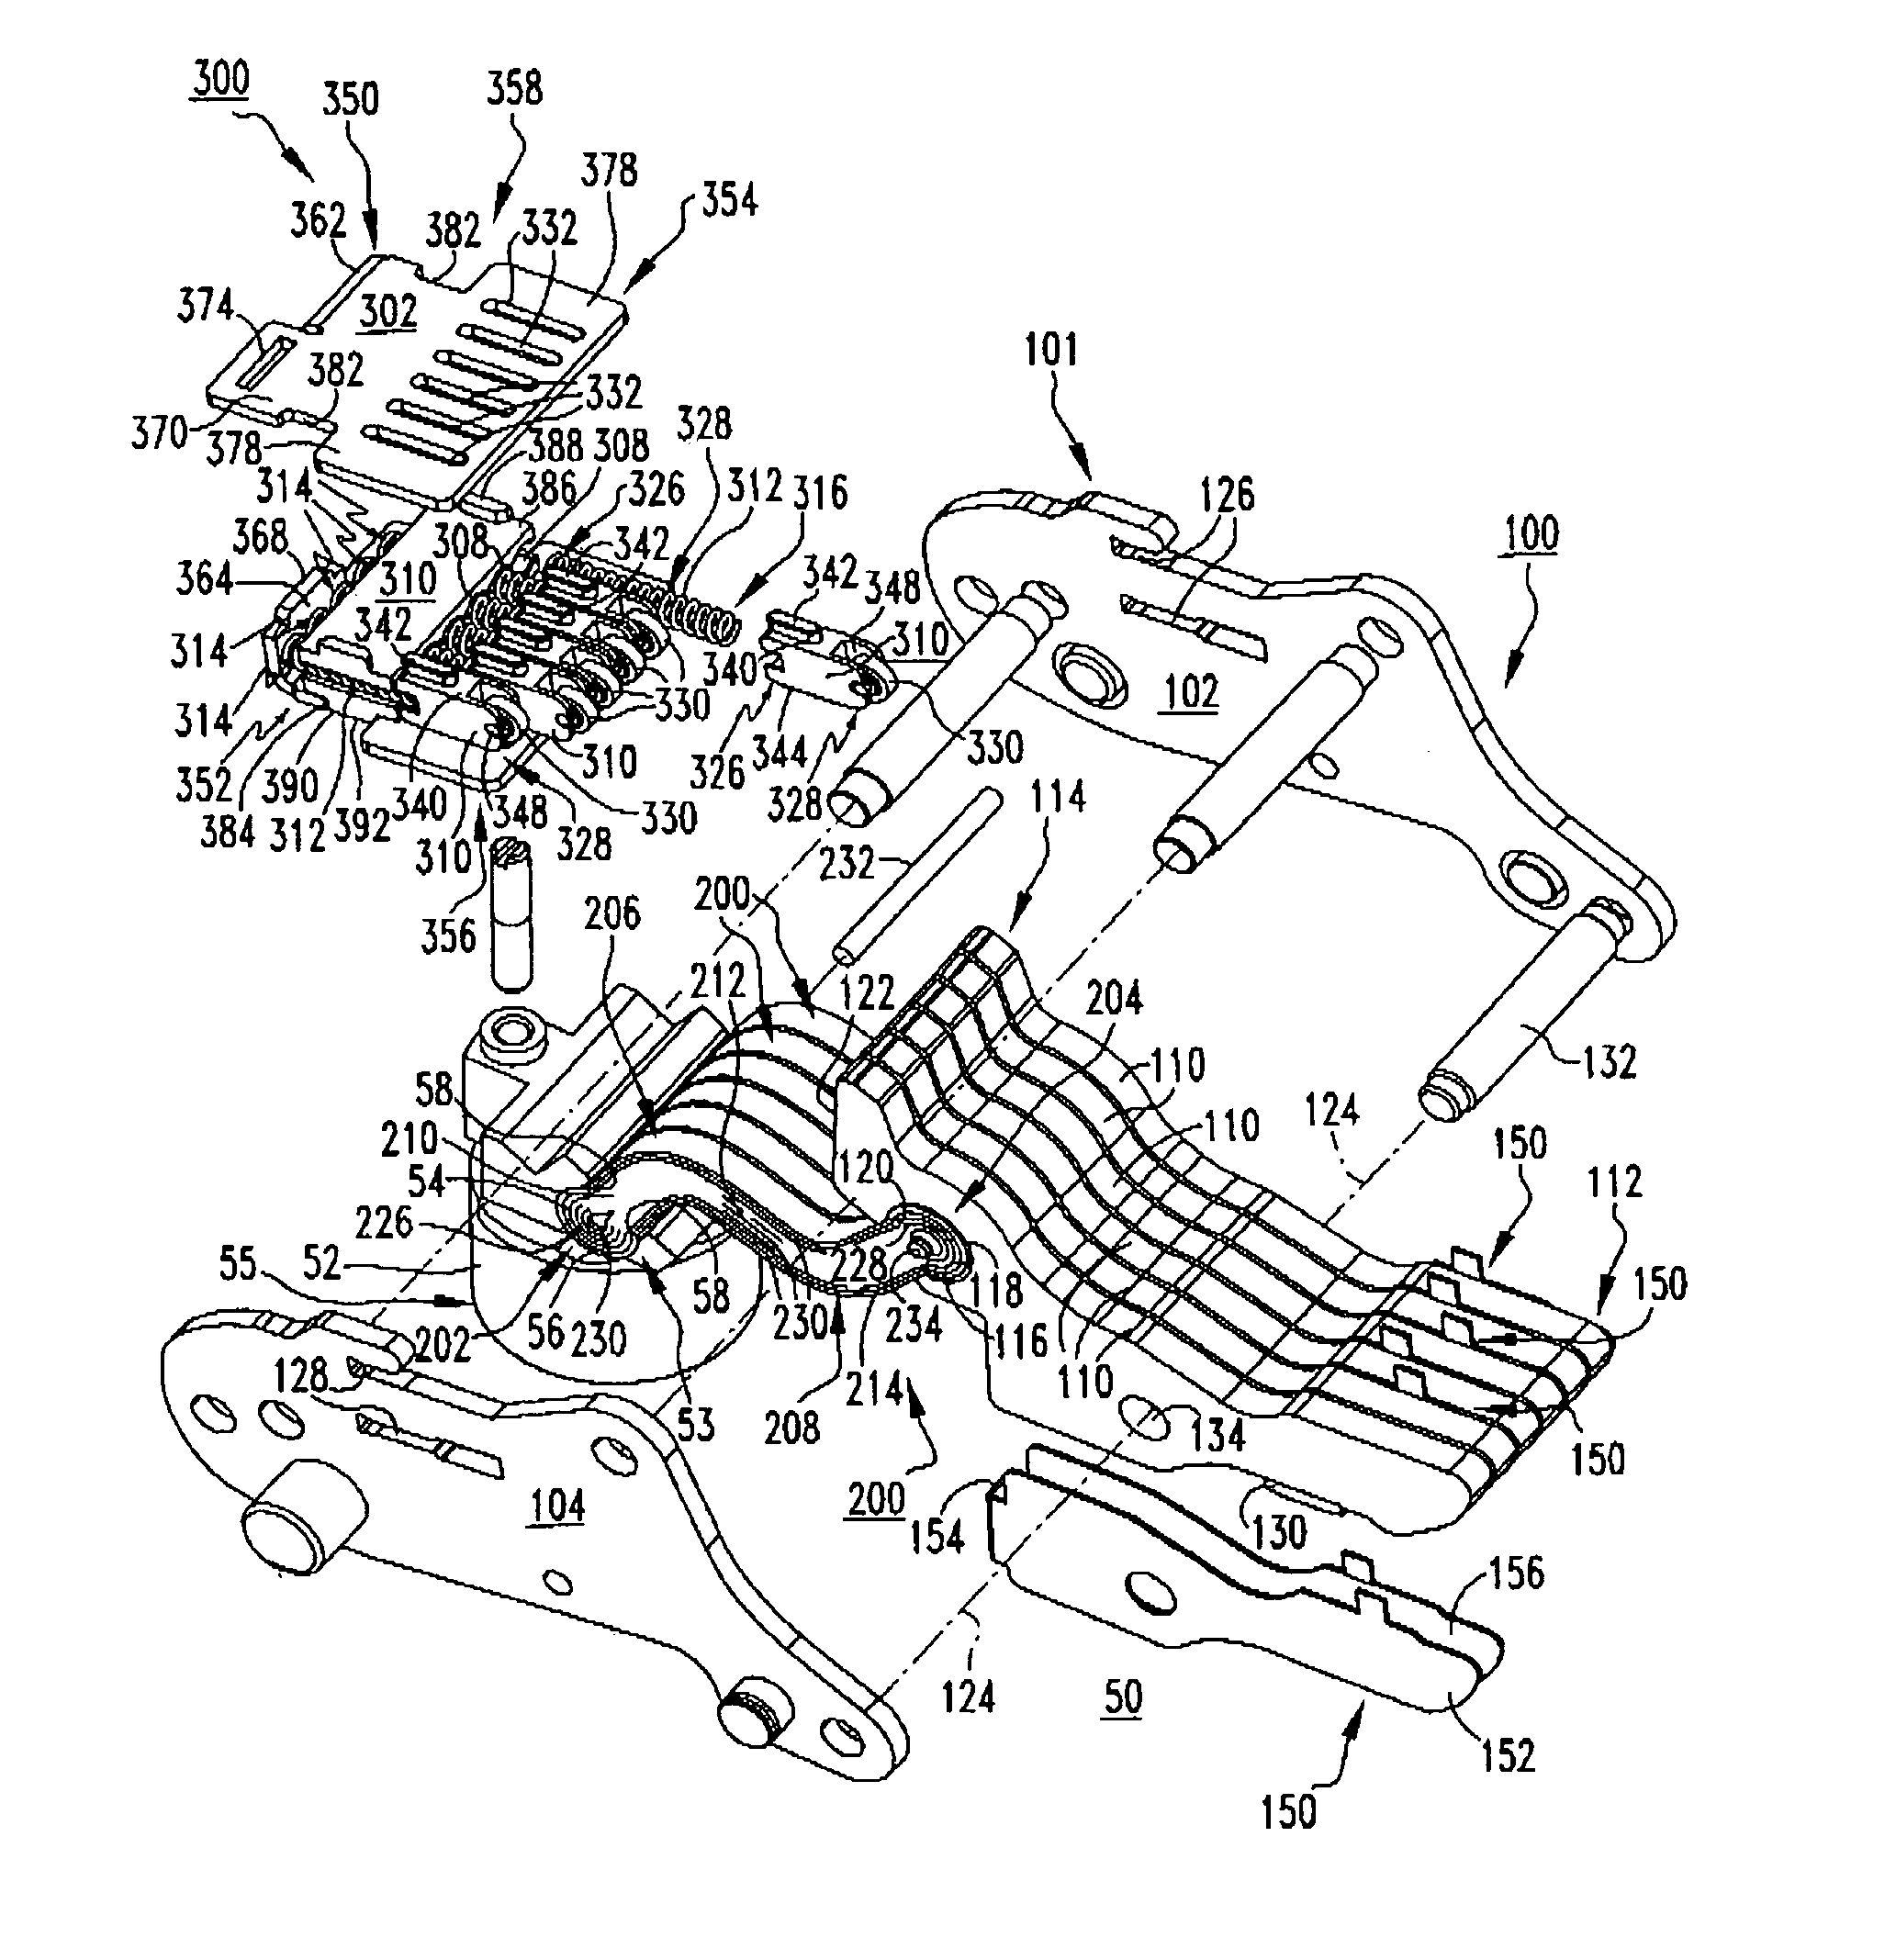 Electrical switching apparatus, and movable contact assembly and contact spring assembly therefor